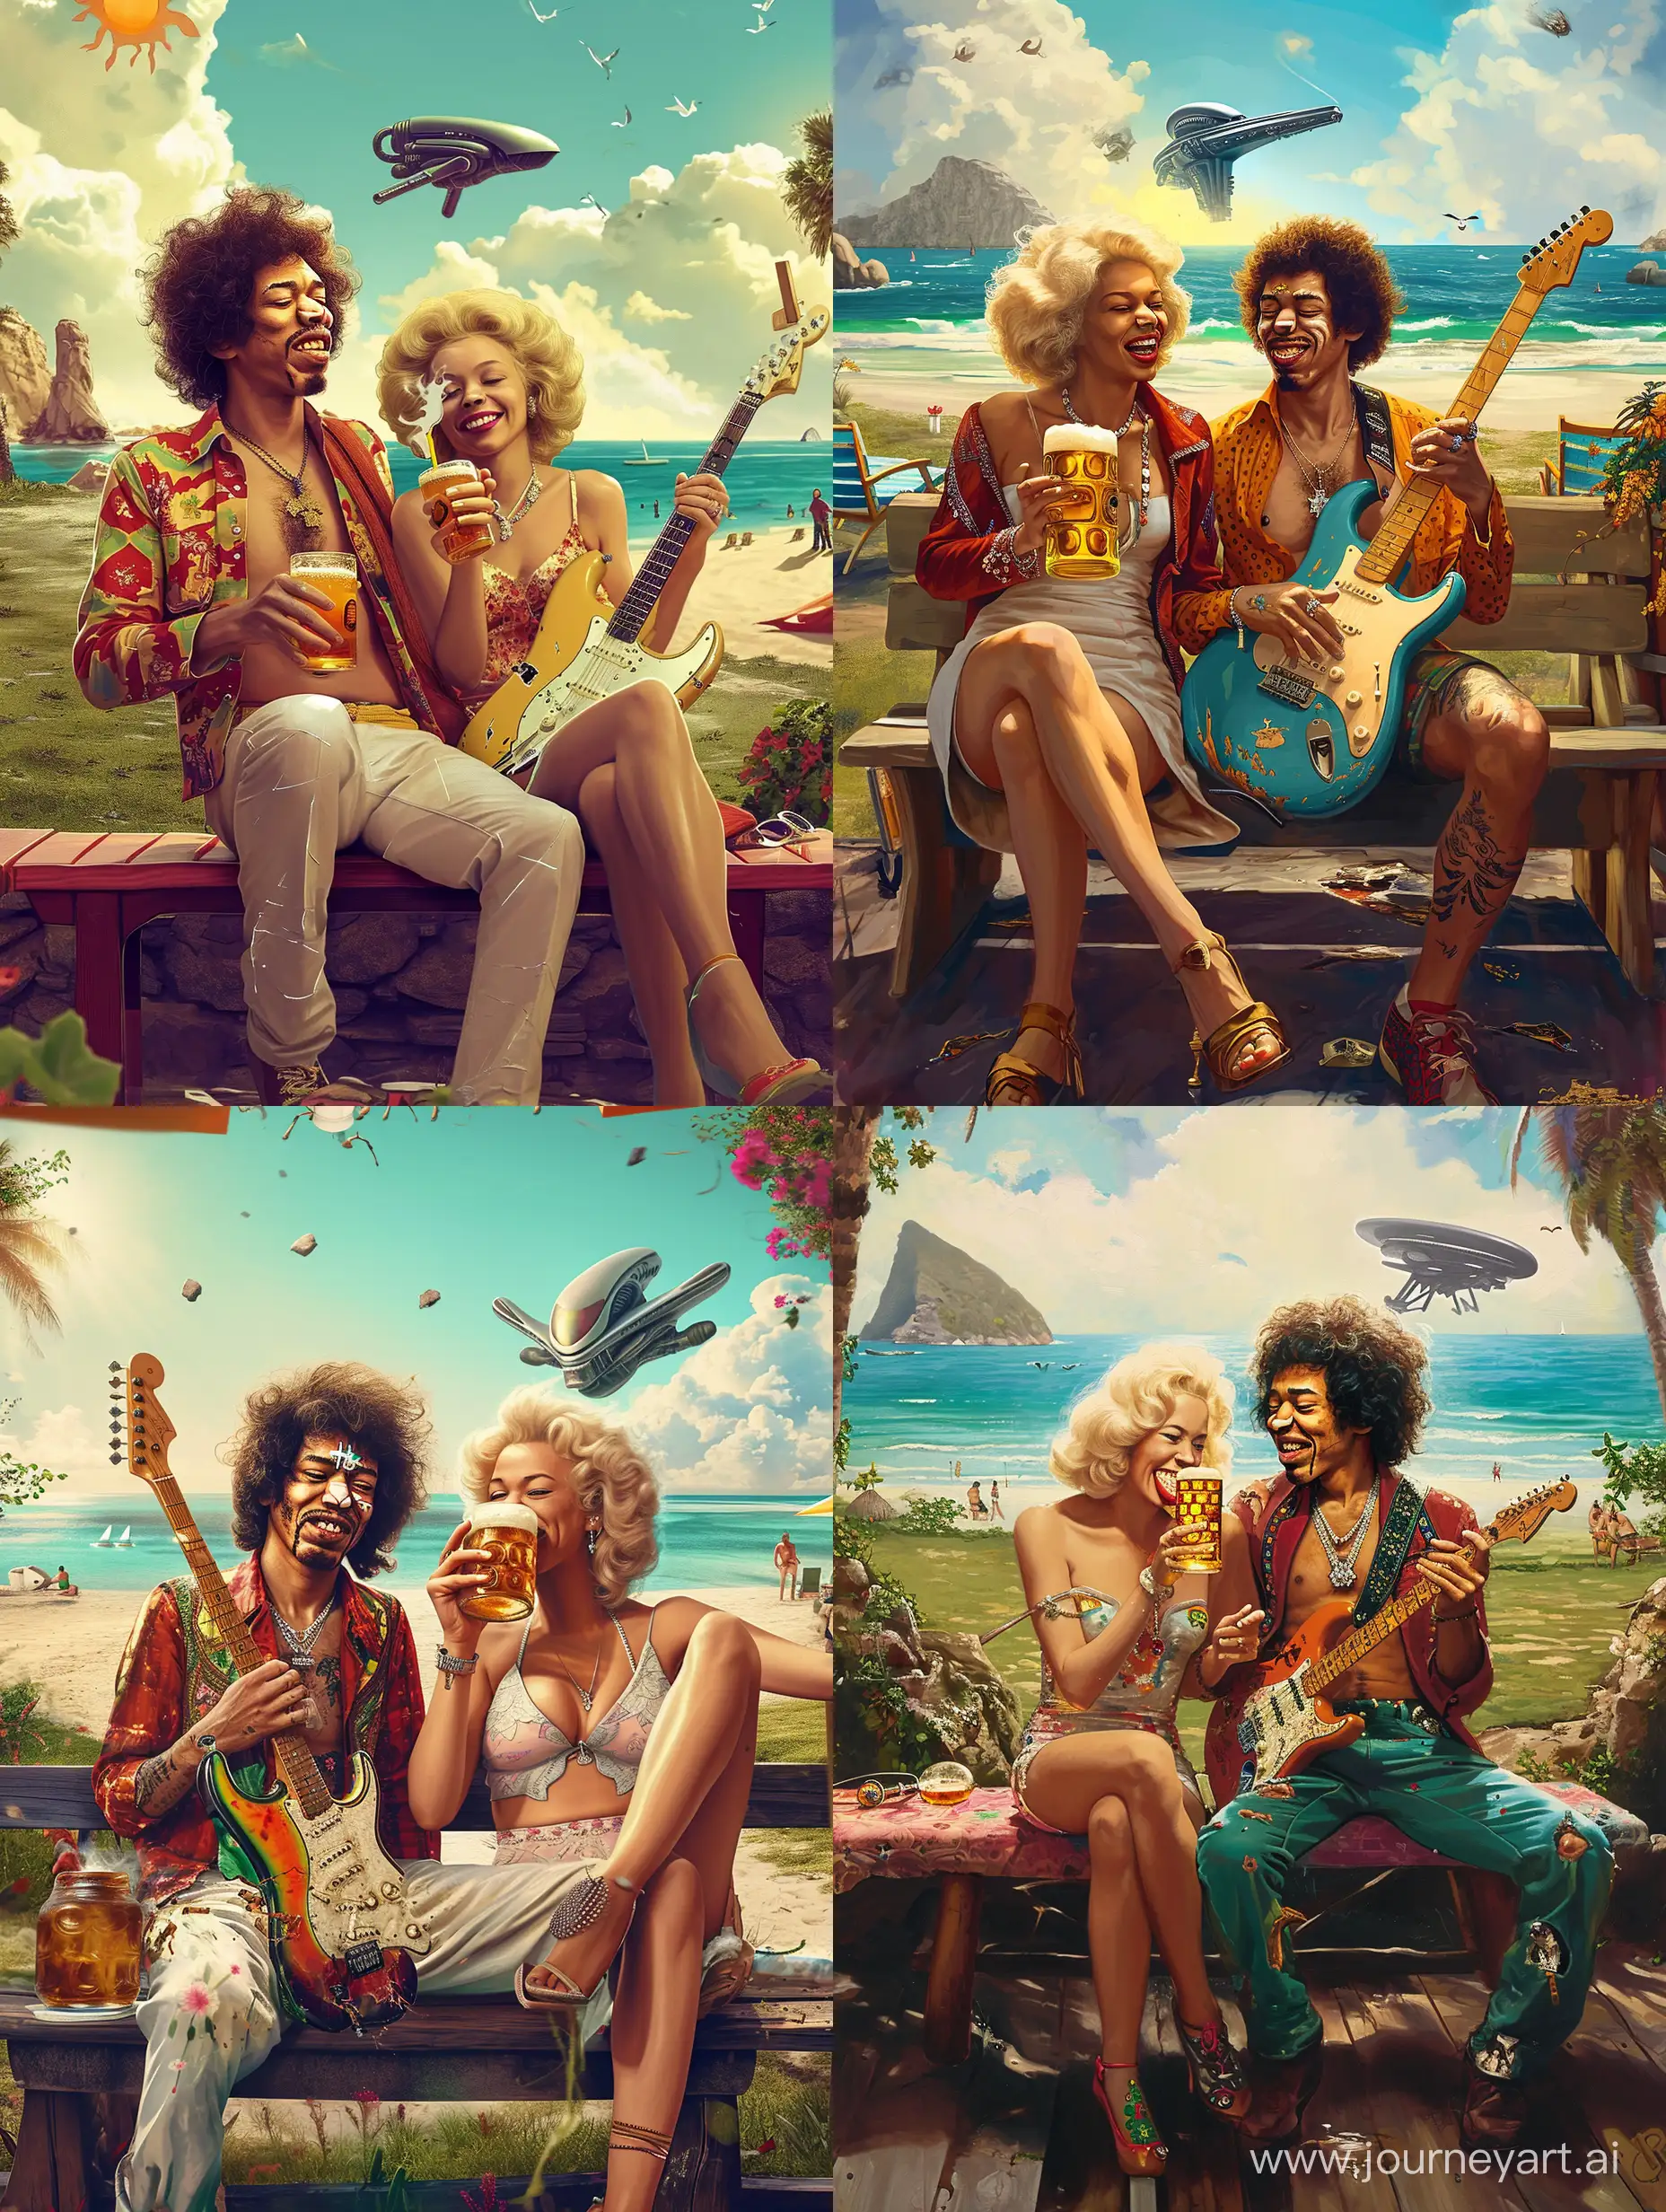 Jimi Hendrix with Marilyn Monroe  sitting on a bench drinking beer together, sunshine, colorful, smiling, sea on a background, beach bar, realistic,  love, alien ship on a background , broken fender Stratocaster, 